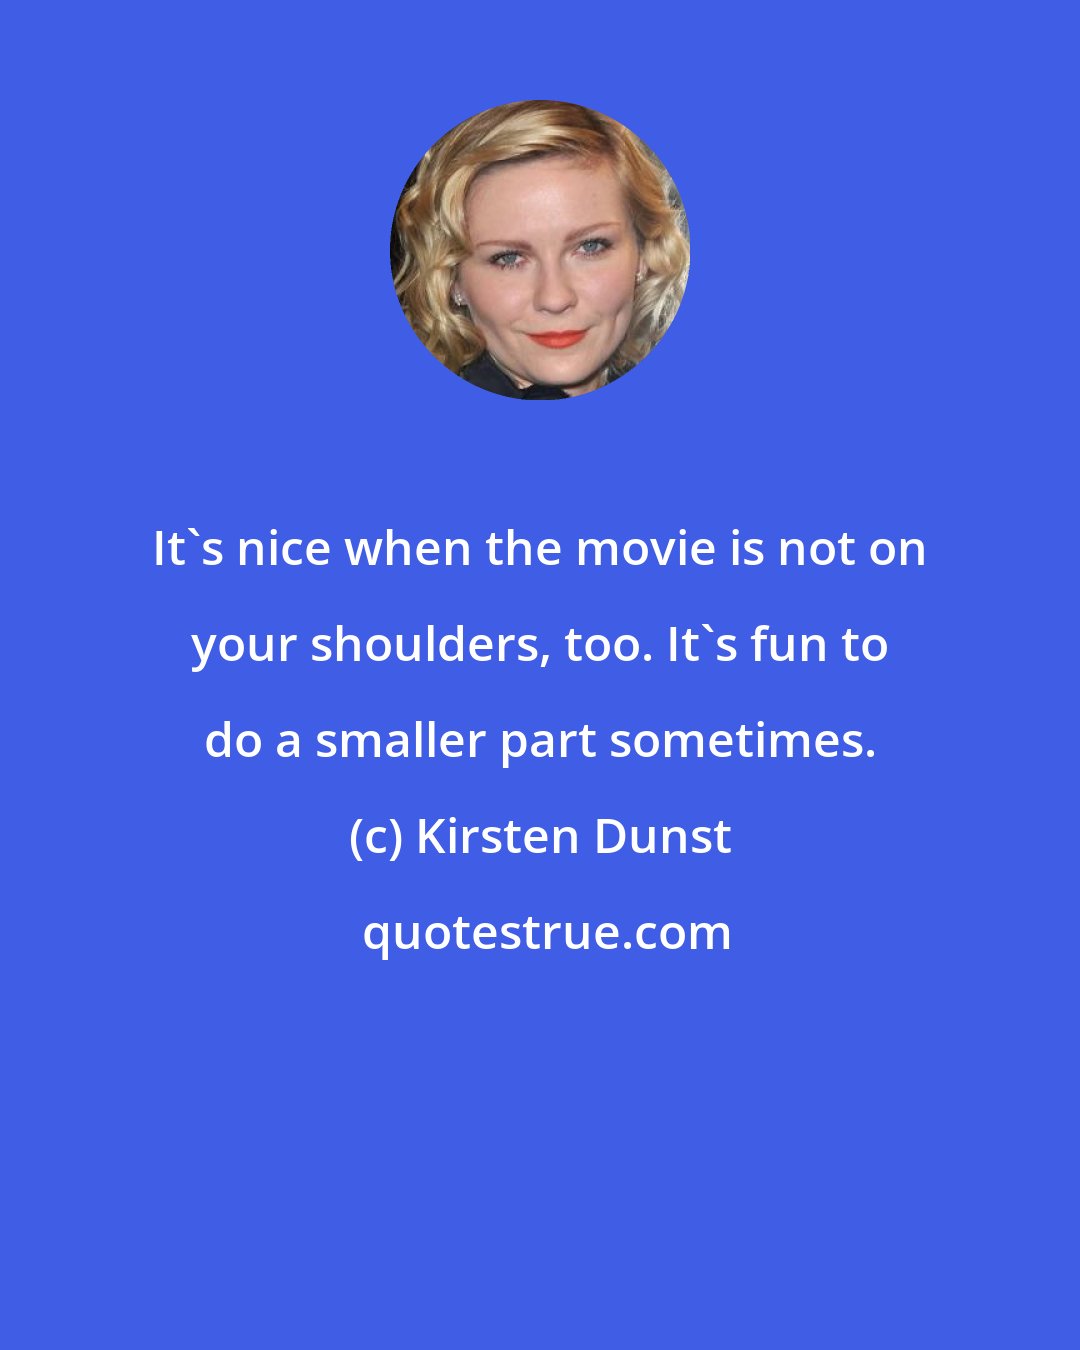 Kirsten Dunst: It's nice when the movie is not on your shoulders, too. It's fun to do a smaller part sometimes.